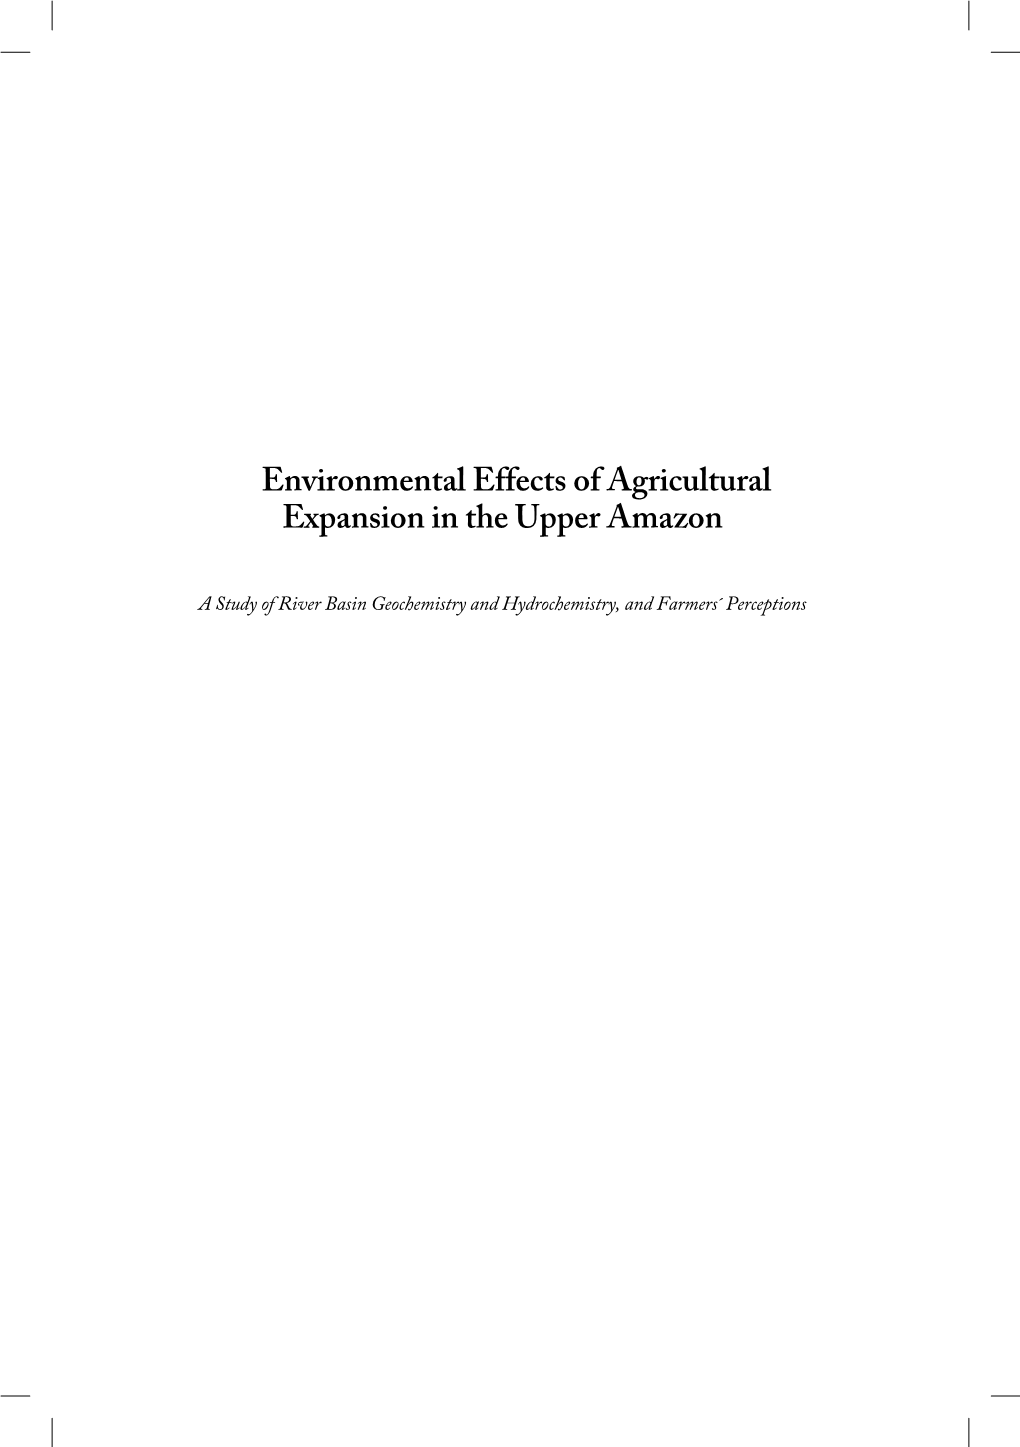 Environmental Effects of Agricultural Expansion in the Upper Amazon